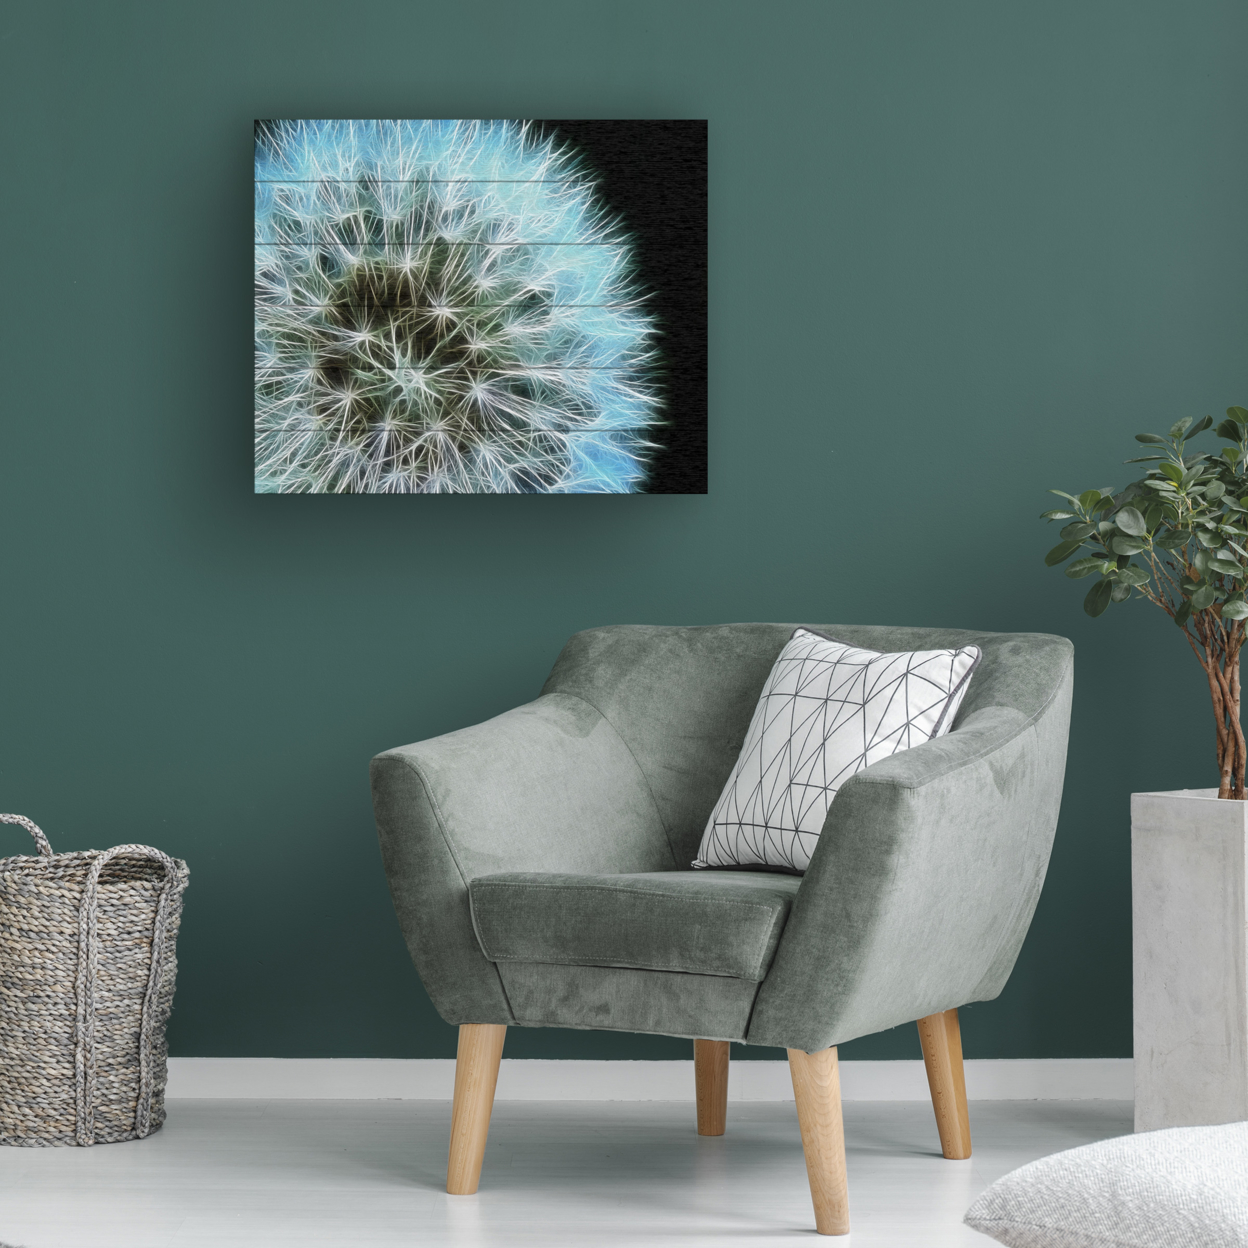 Wooden Slat Art 18 X 22 Inches Titled Dandelion Seed Head Full Ready To Hang Home Decor Picture